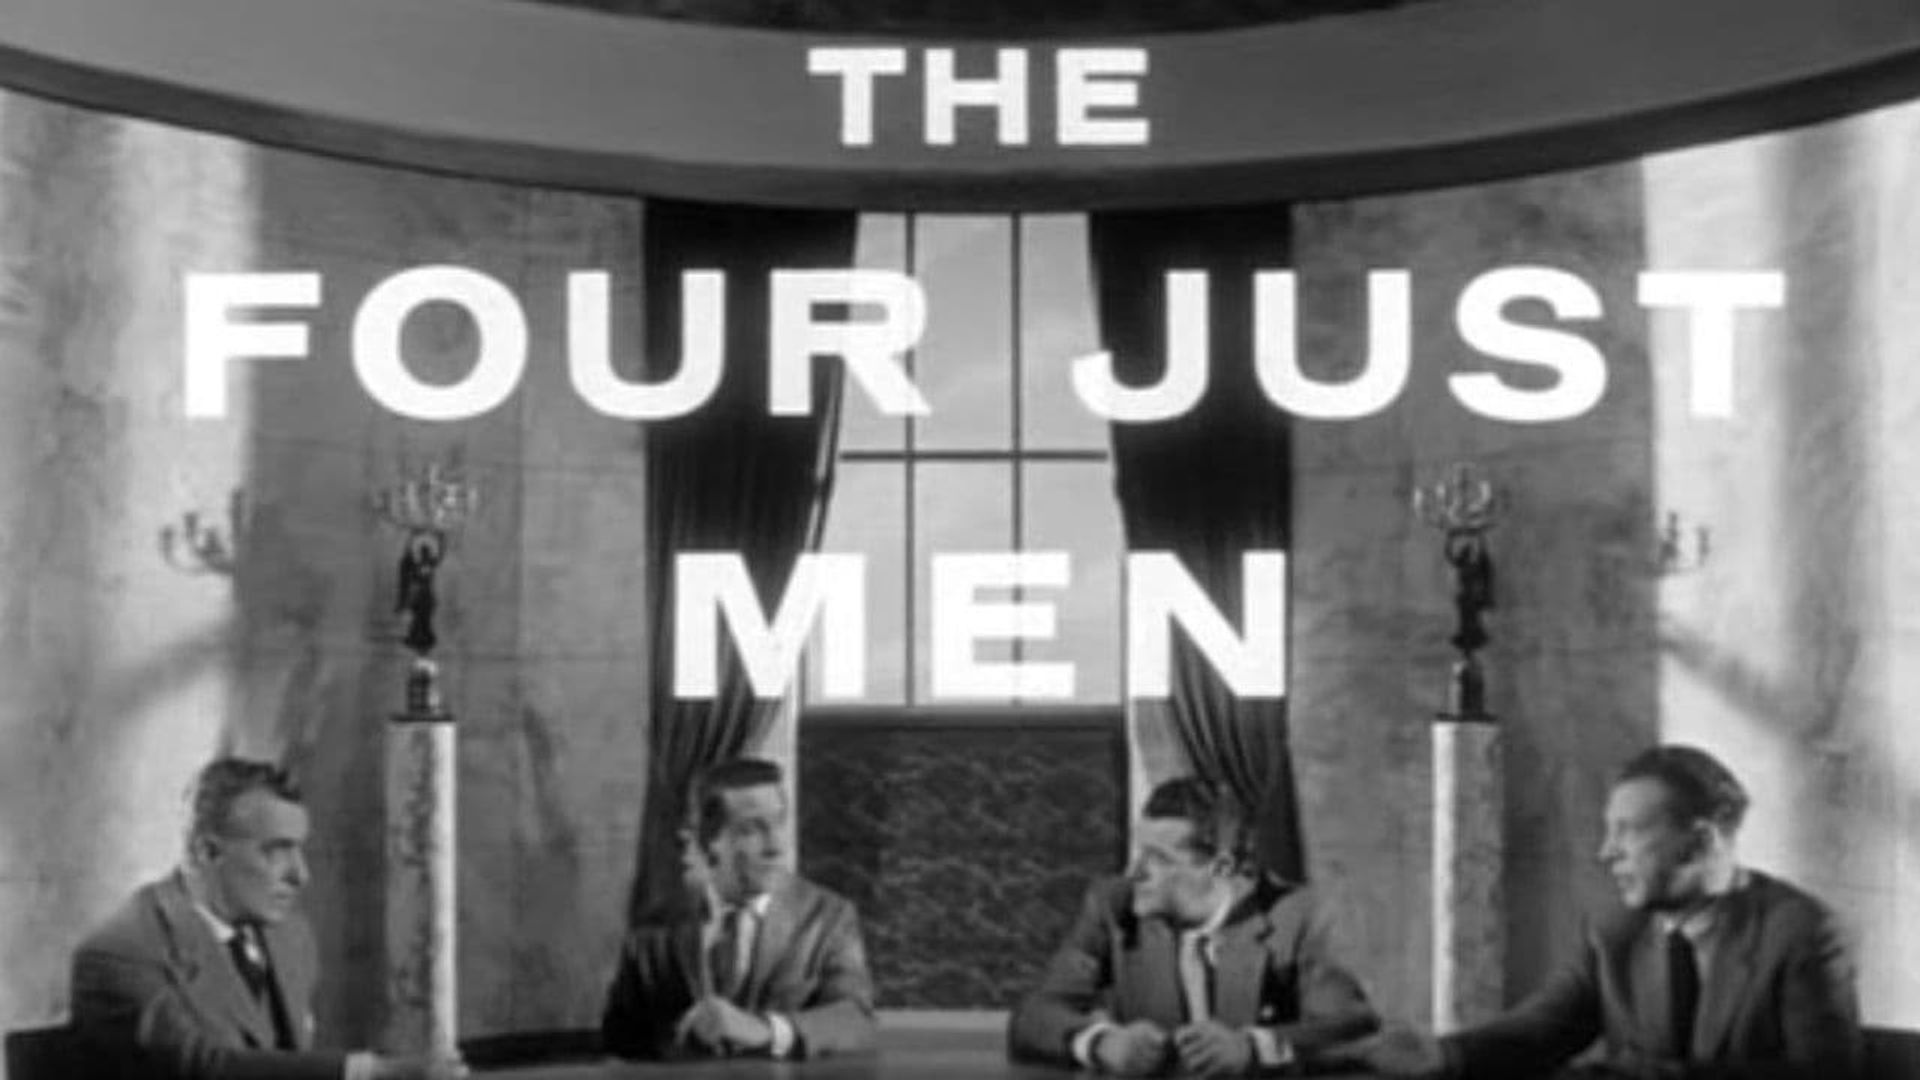 The Four Just Men background